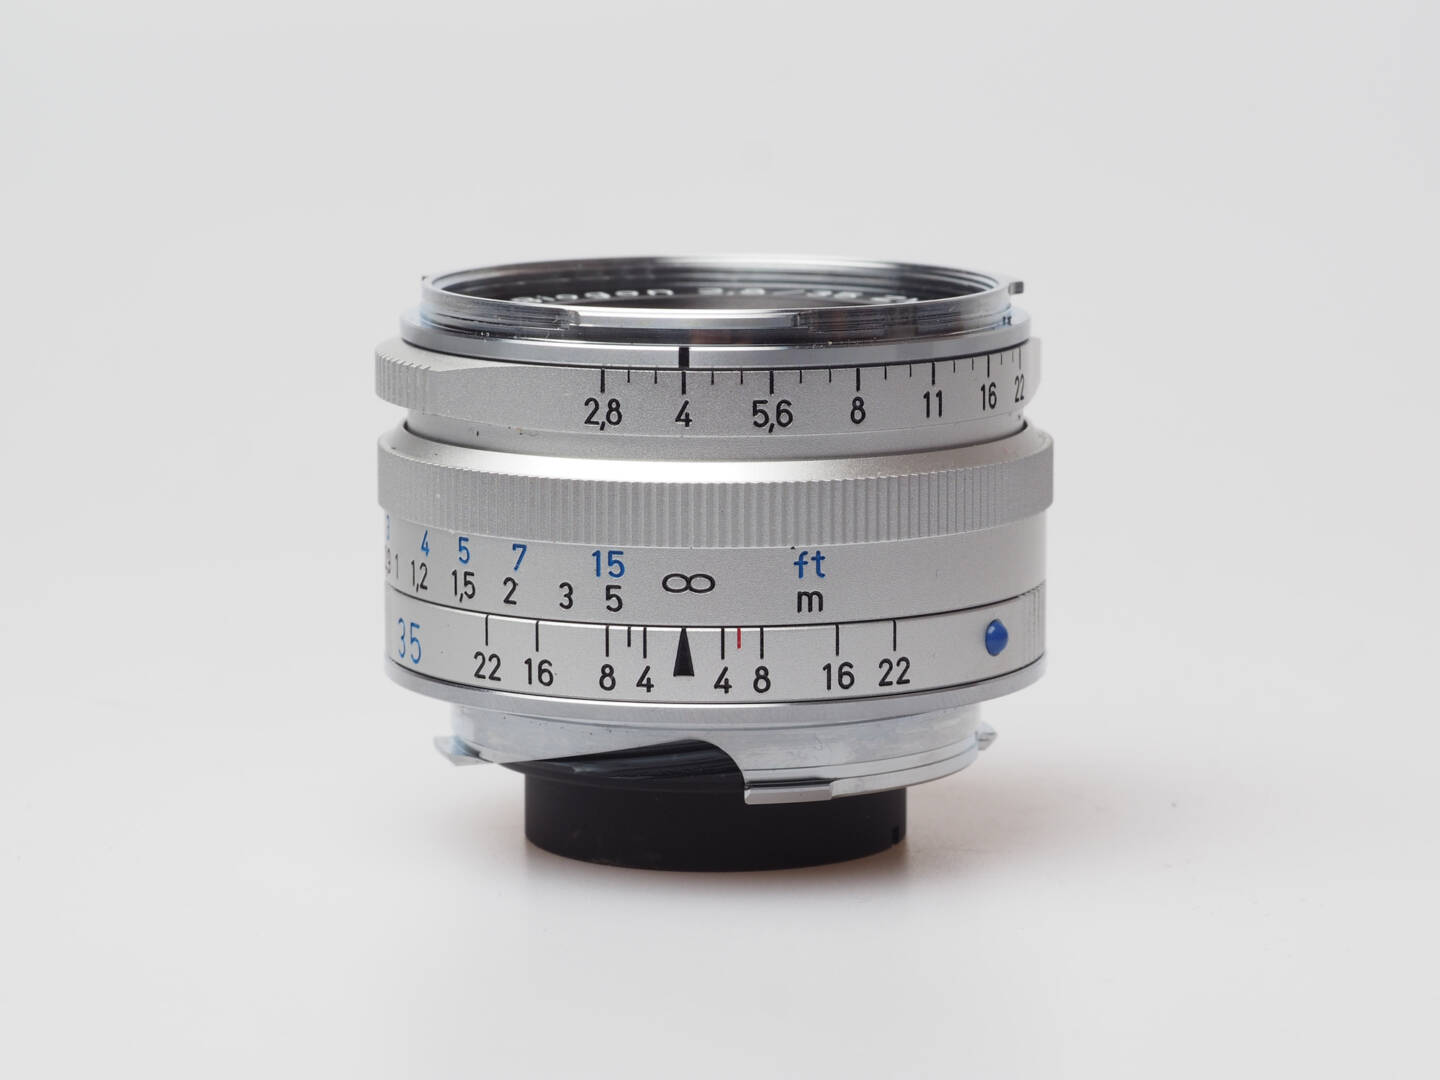 Small and very good, but with some issues on digital cameras: Zeiss Biogon ZM 35/2.8 T*